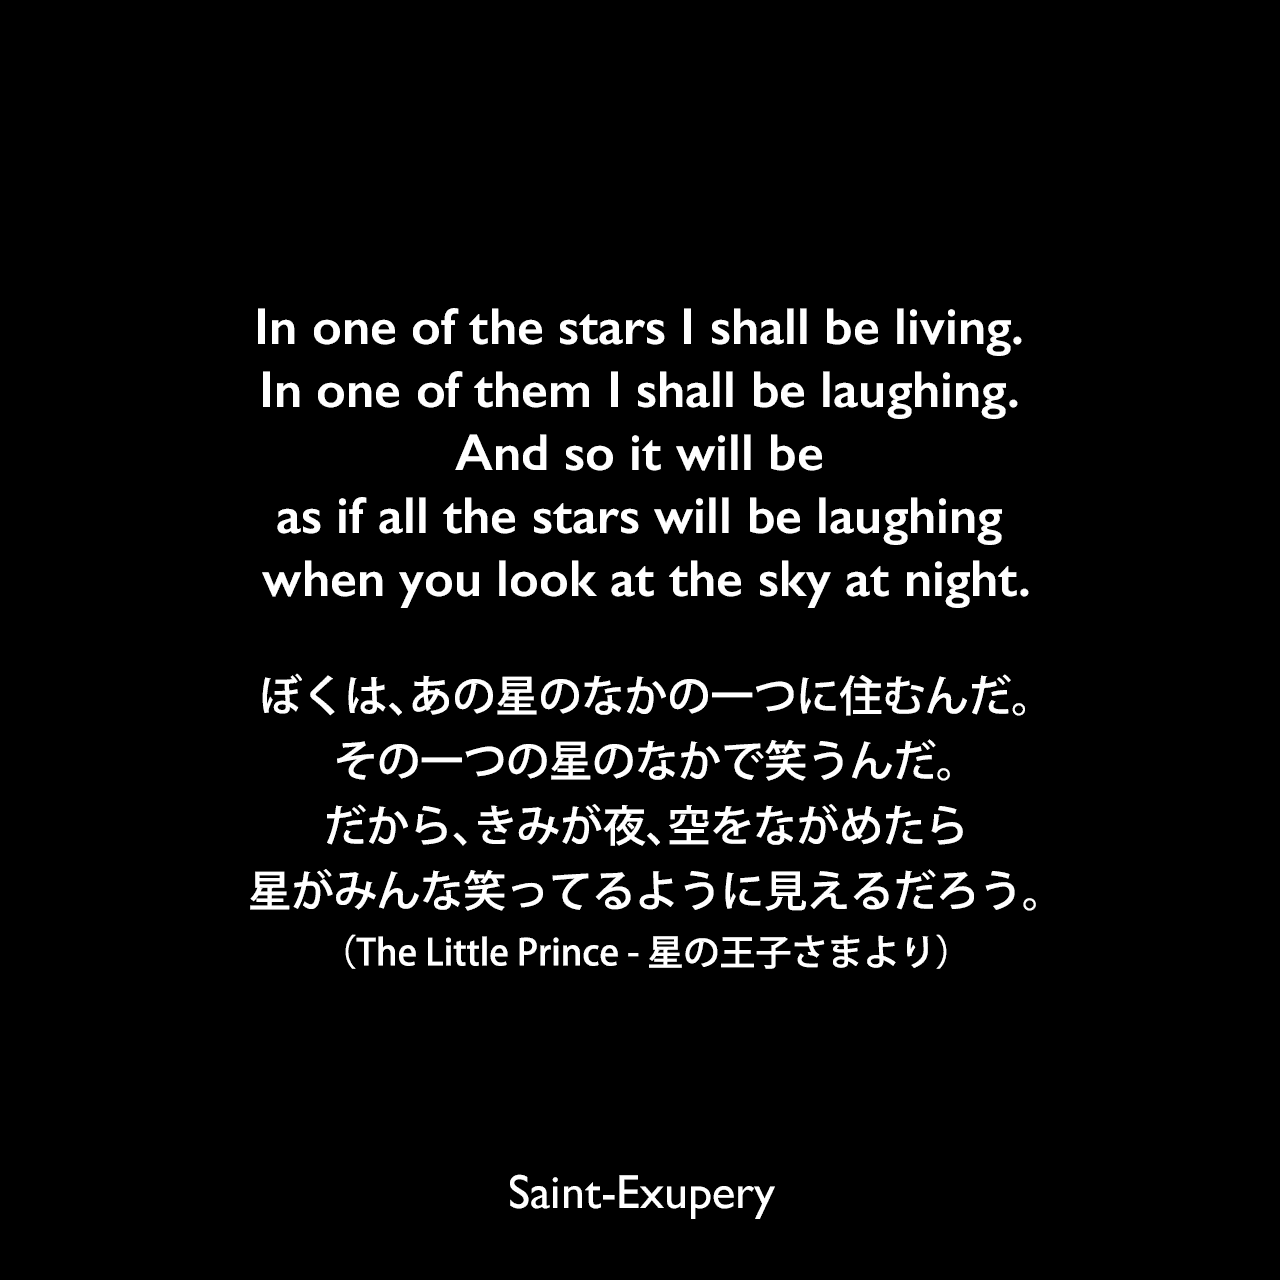 In one of the stars I shall be living. In one of them I shall be laughing. And so it will be as if all the stars will be laughing when you look at the sky at night.ぼくは、あの星のなかの一つに住むんだ。その一つの星のなかで笑うんだ。だから、きみが夜、空をながめたら、星がみんな笑ってるように見えるだろう。（The Little Prince - 星の王子さまより）Saint-Exupery